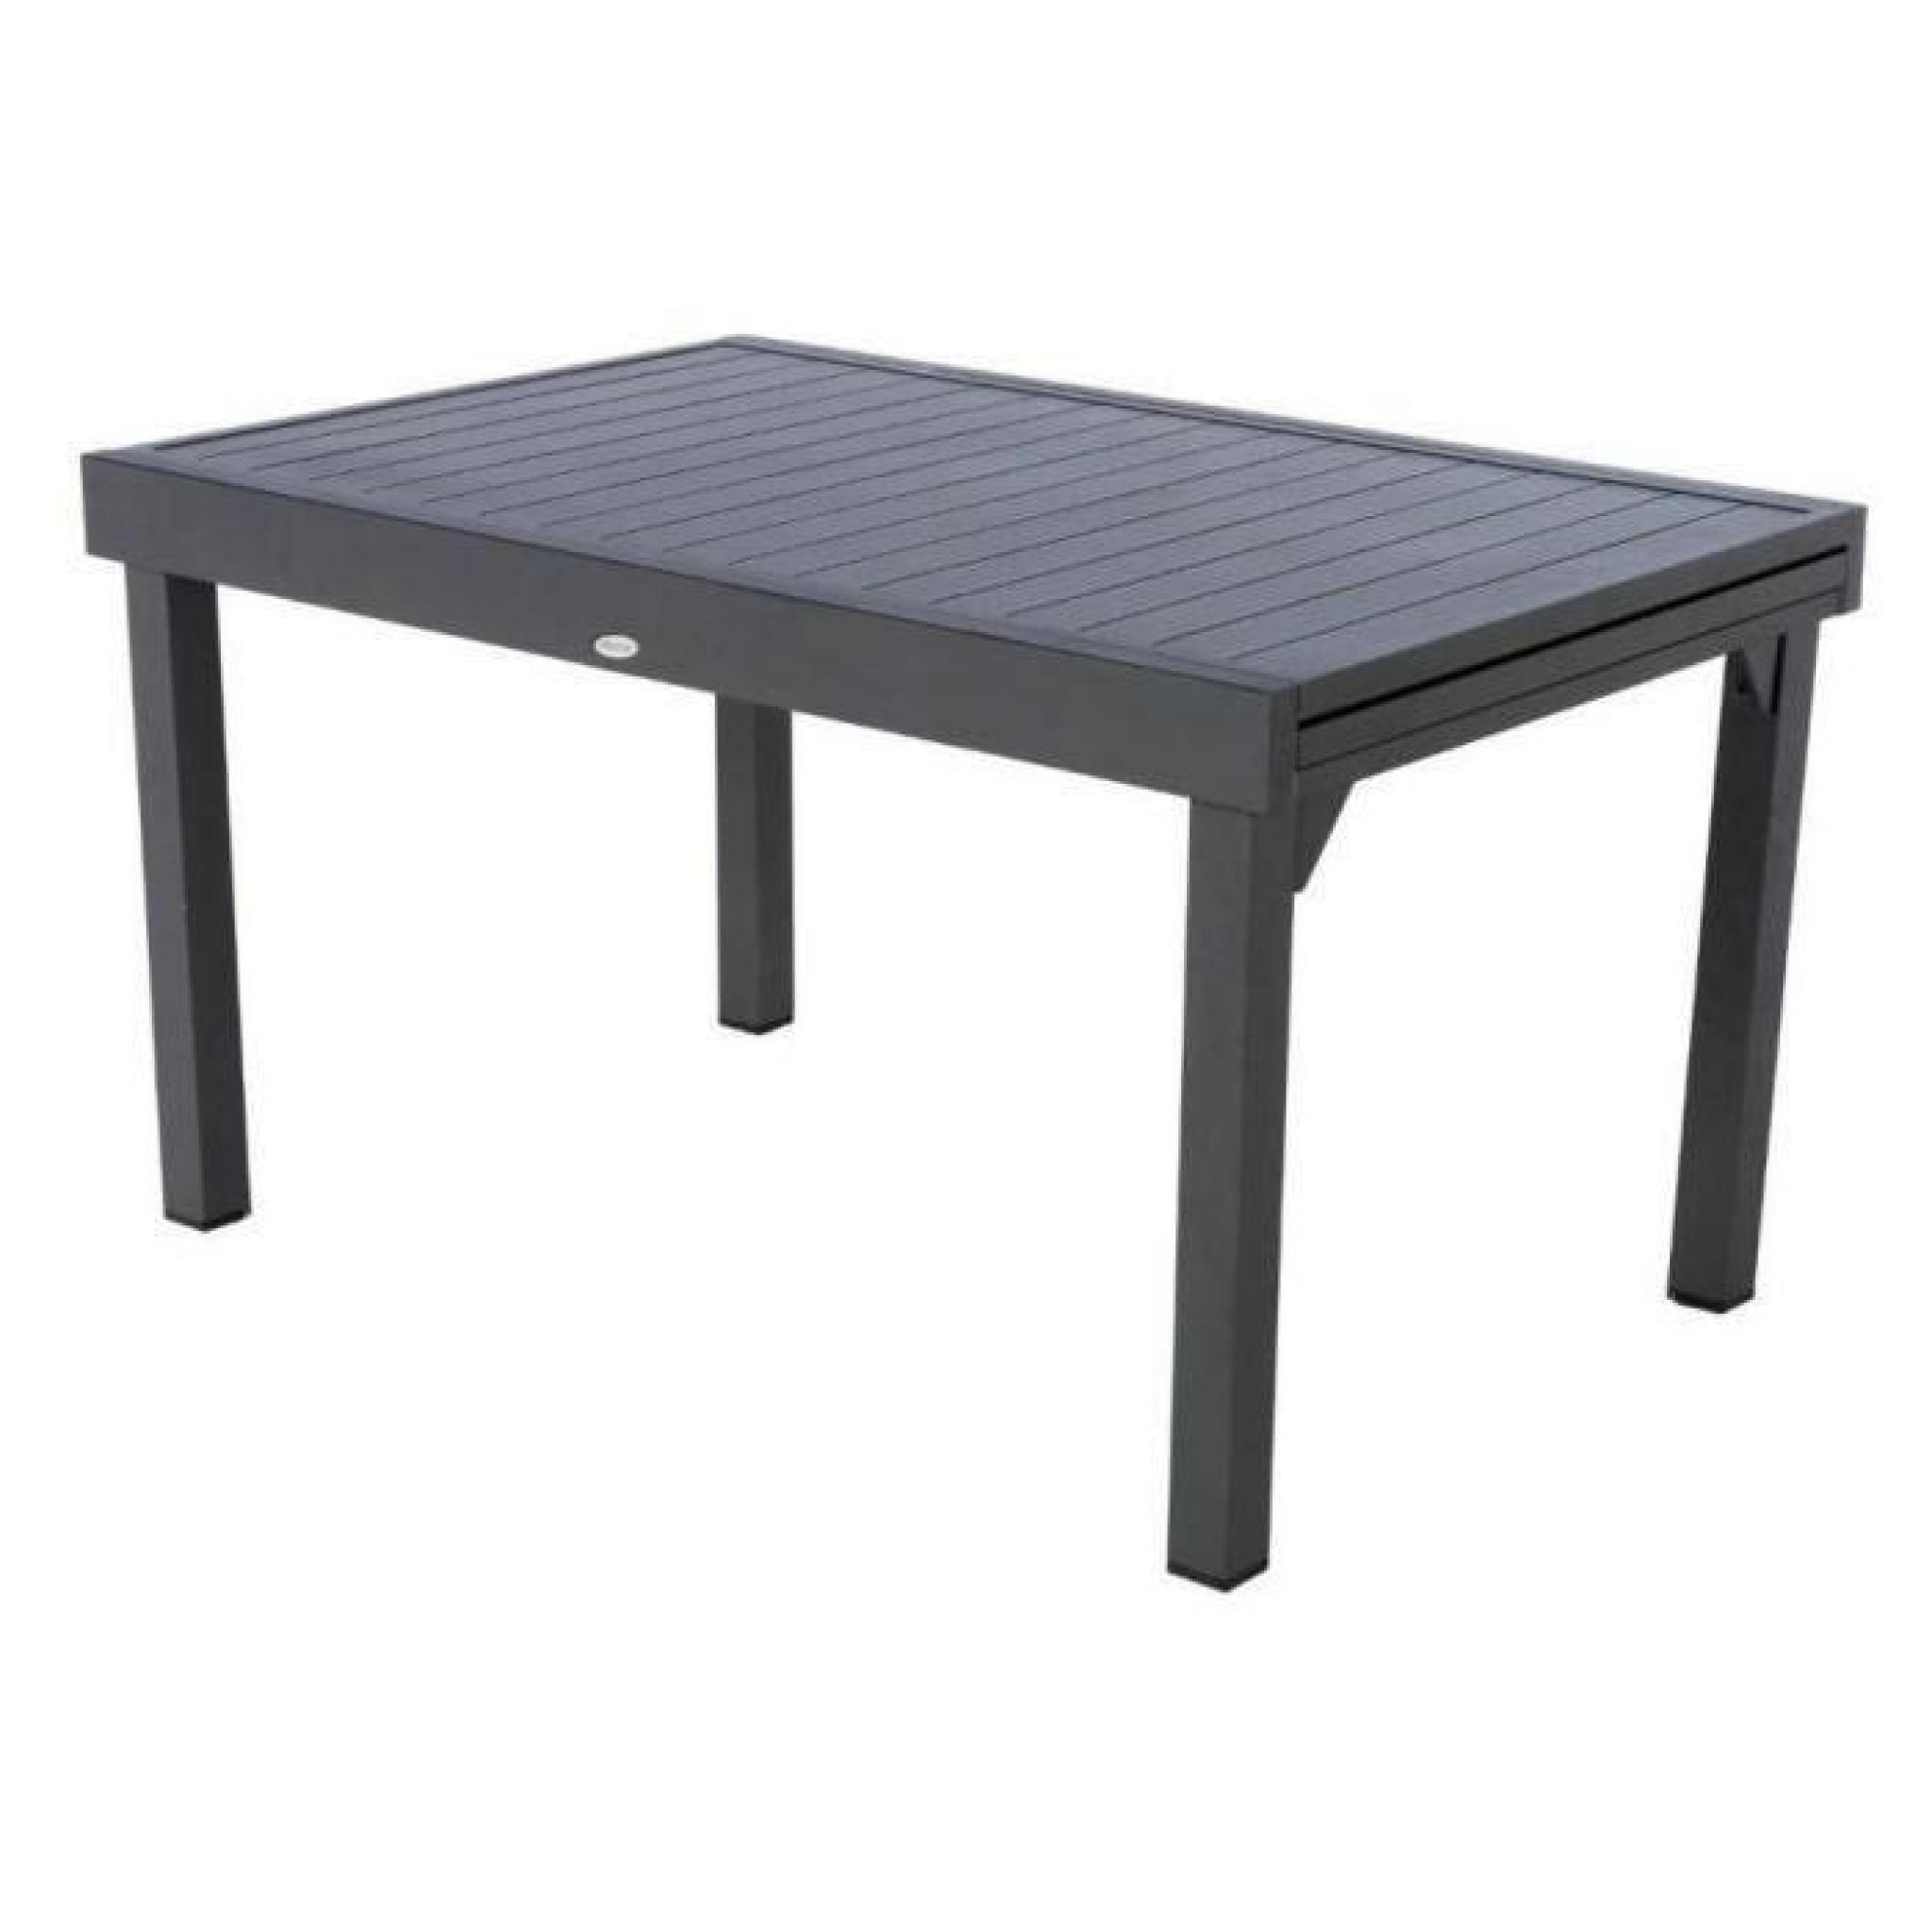 TABLE PIAZZA ALU HESPERIDE EXTENSIBLE 10 P. GRAPHITE pas cher